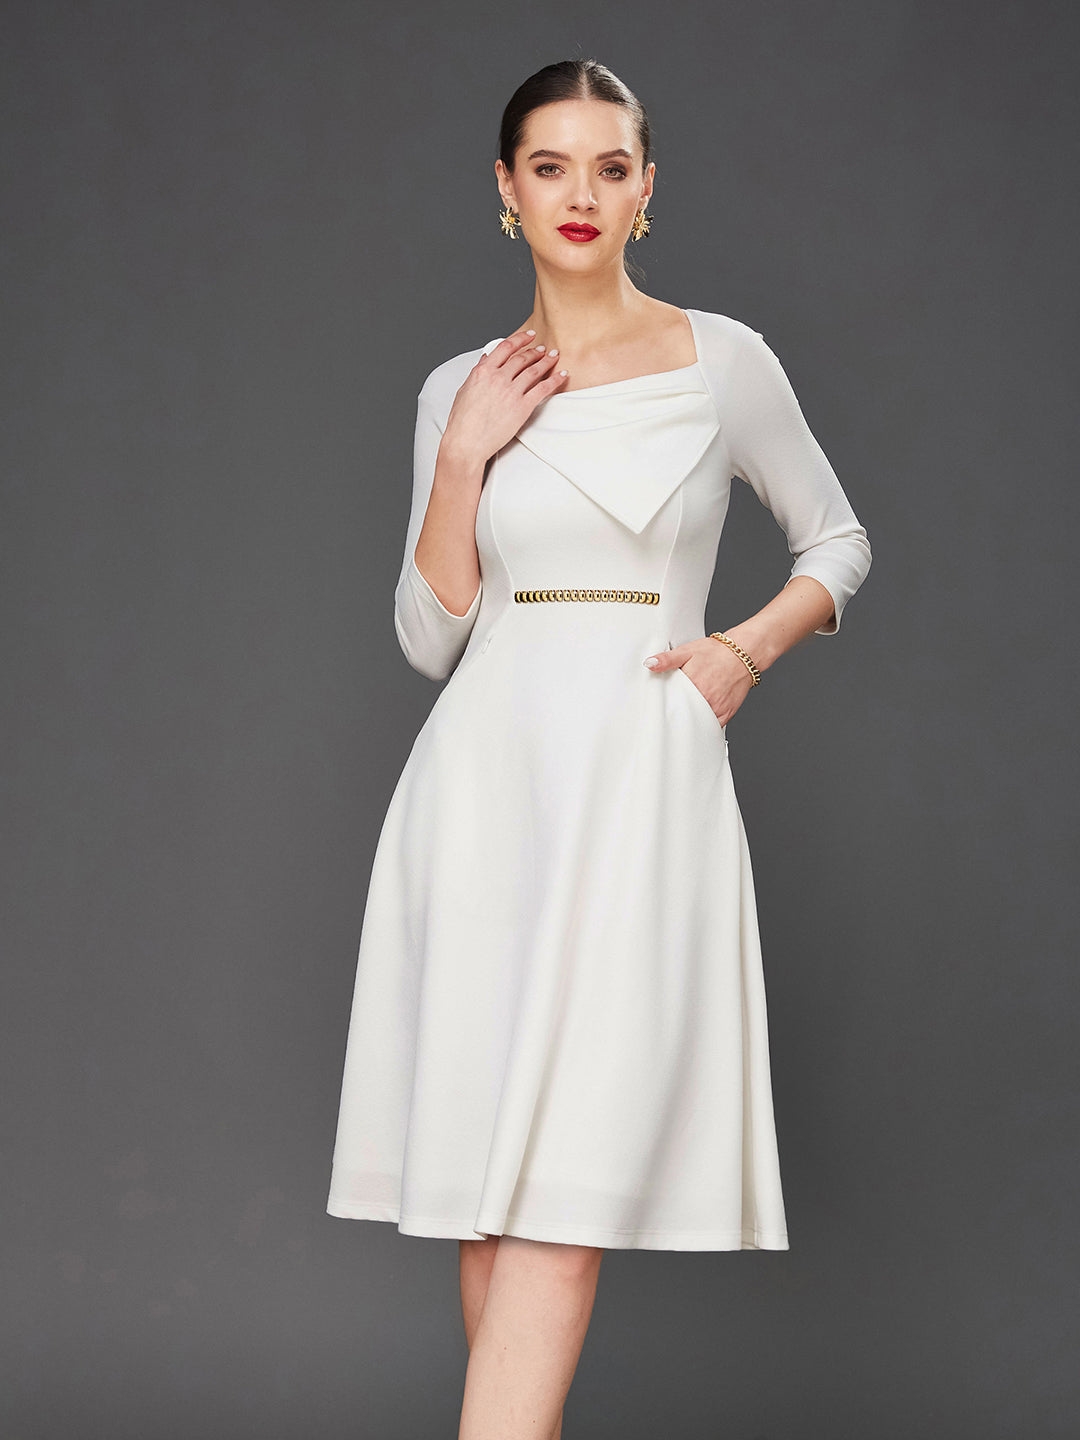 Off White Solid Square Neck Raglan Sleeves Side Pocketed Polyester Fit and Flare Knee-Length Dress